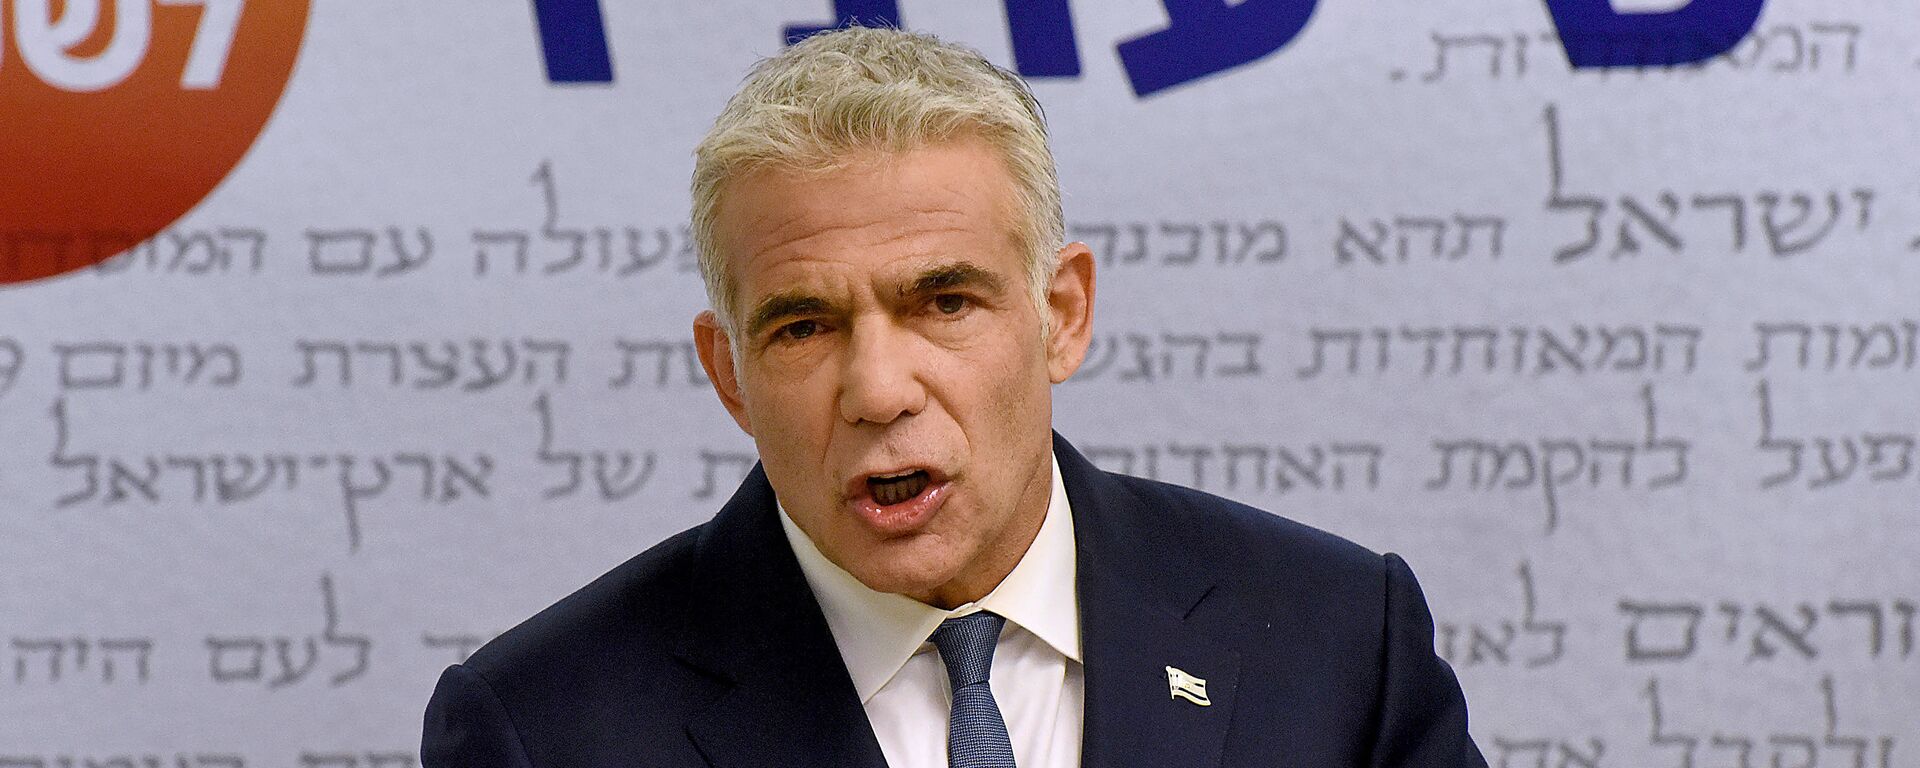 Israel's centrist opposition leader Yair Lapid delivers a statement to the press at the Knesset (Israeli parliament) in Jerusalem on May 31, 2021. - Lapid said many obstacles remain before a diverse coalition to oust long-serving right-wing Prime Minister Benjamin Netanyahu can be agreed. - Sputnik International, 1920, 02.06.2022